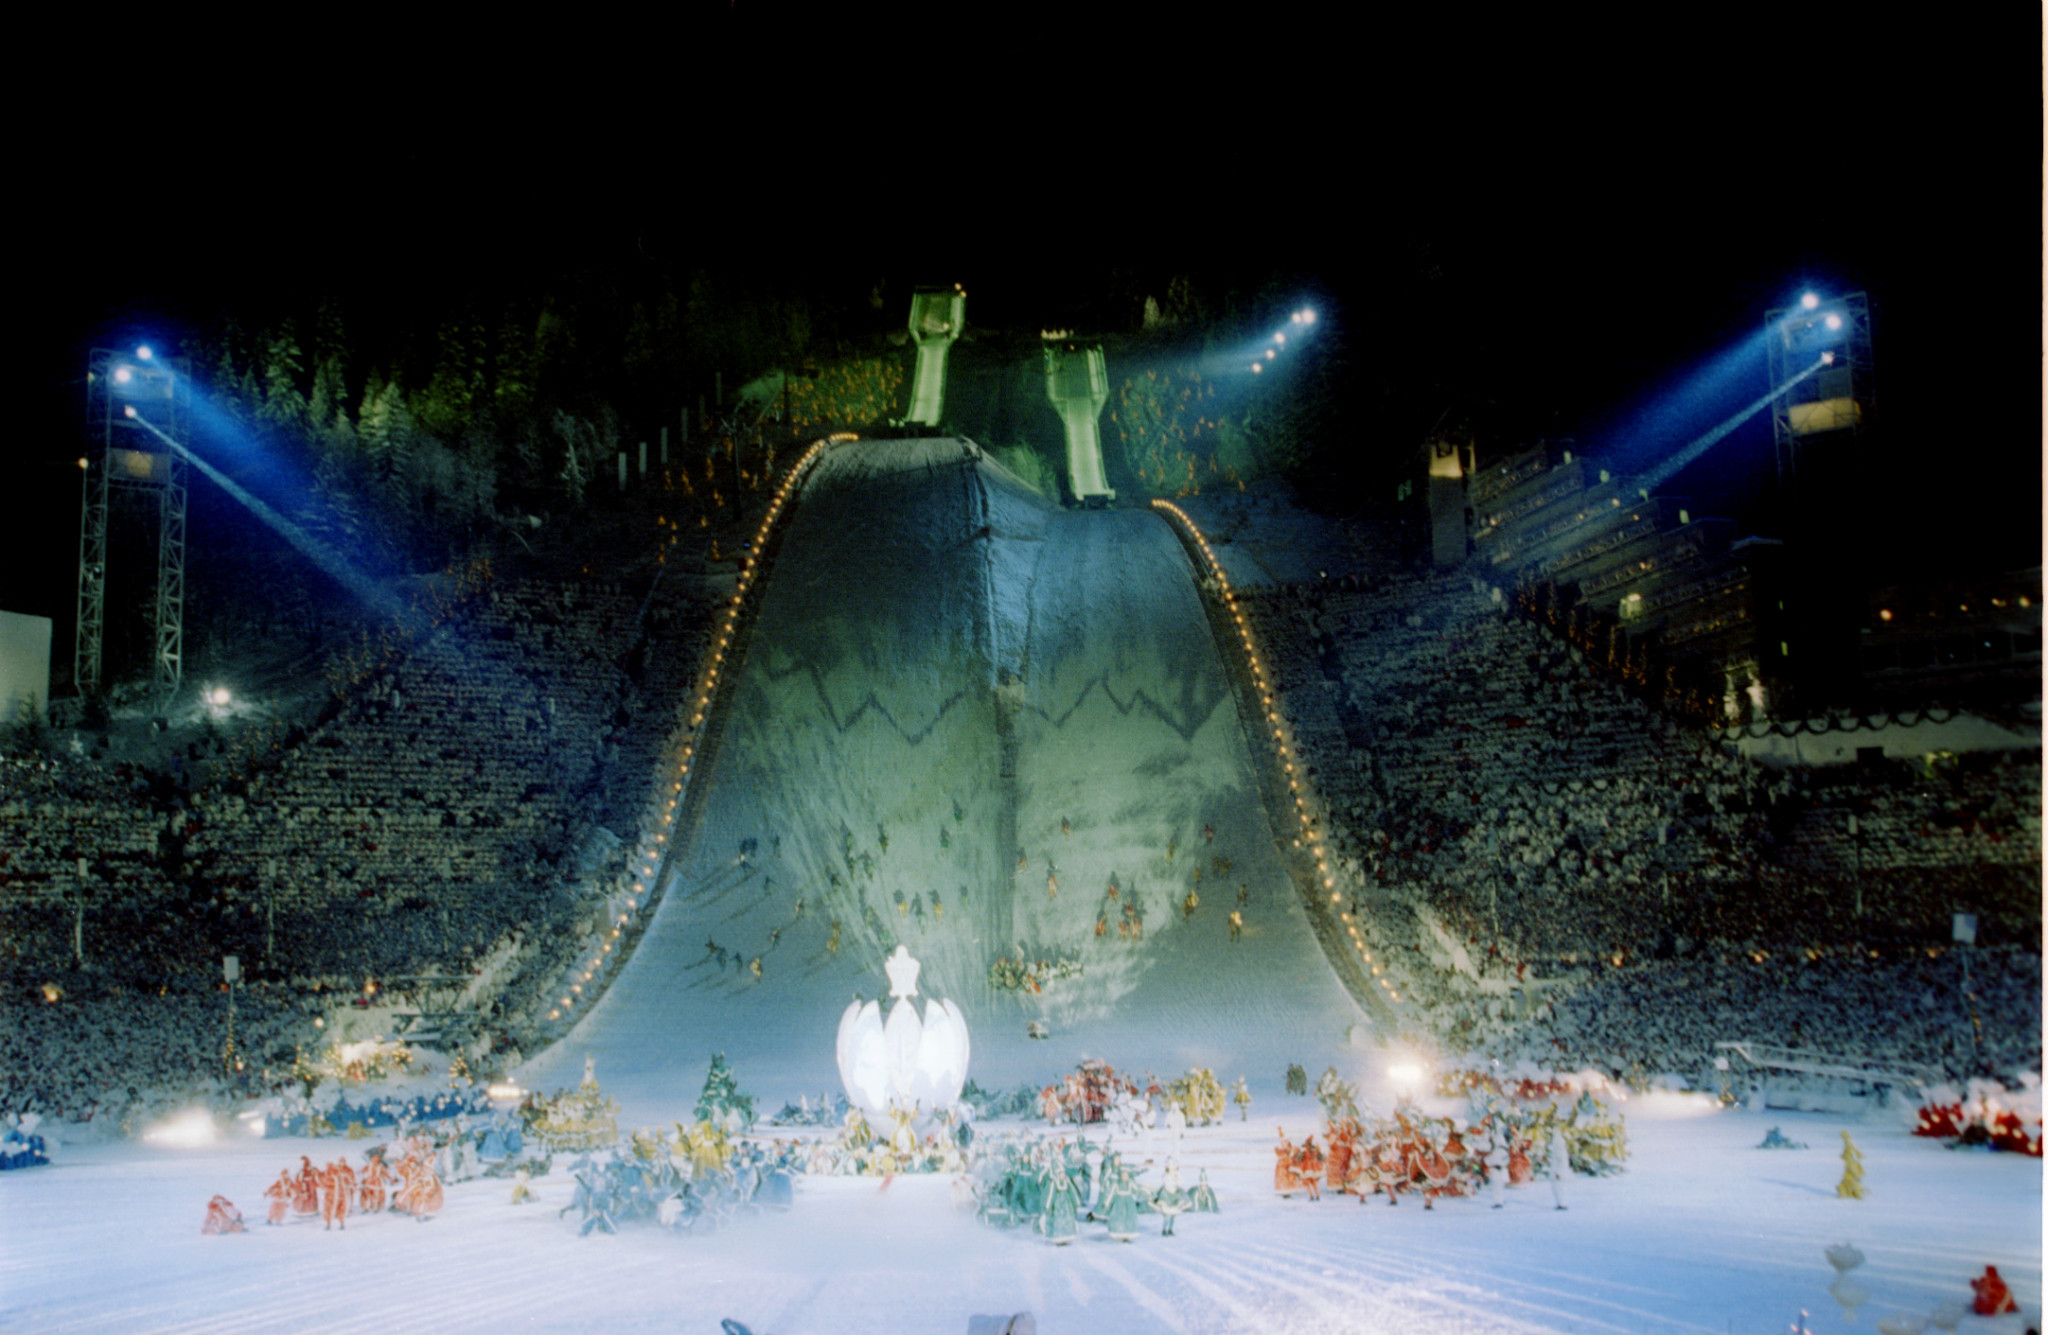 Lillehammer is today beginning the 25th anniversary celebrations of the 1994 Winter Olympic Games ©Getty Images